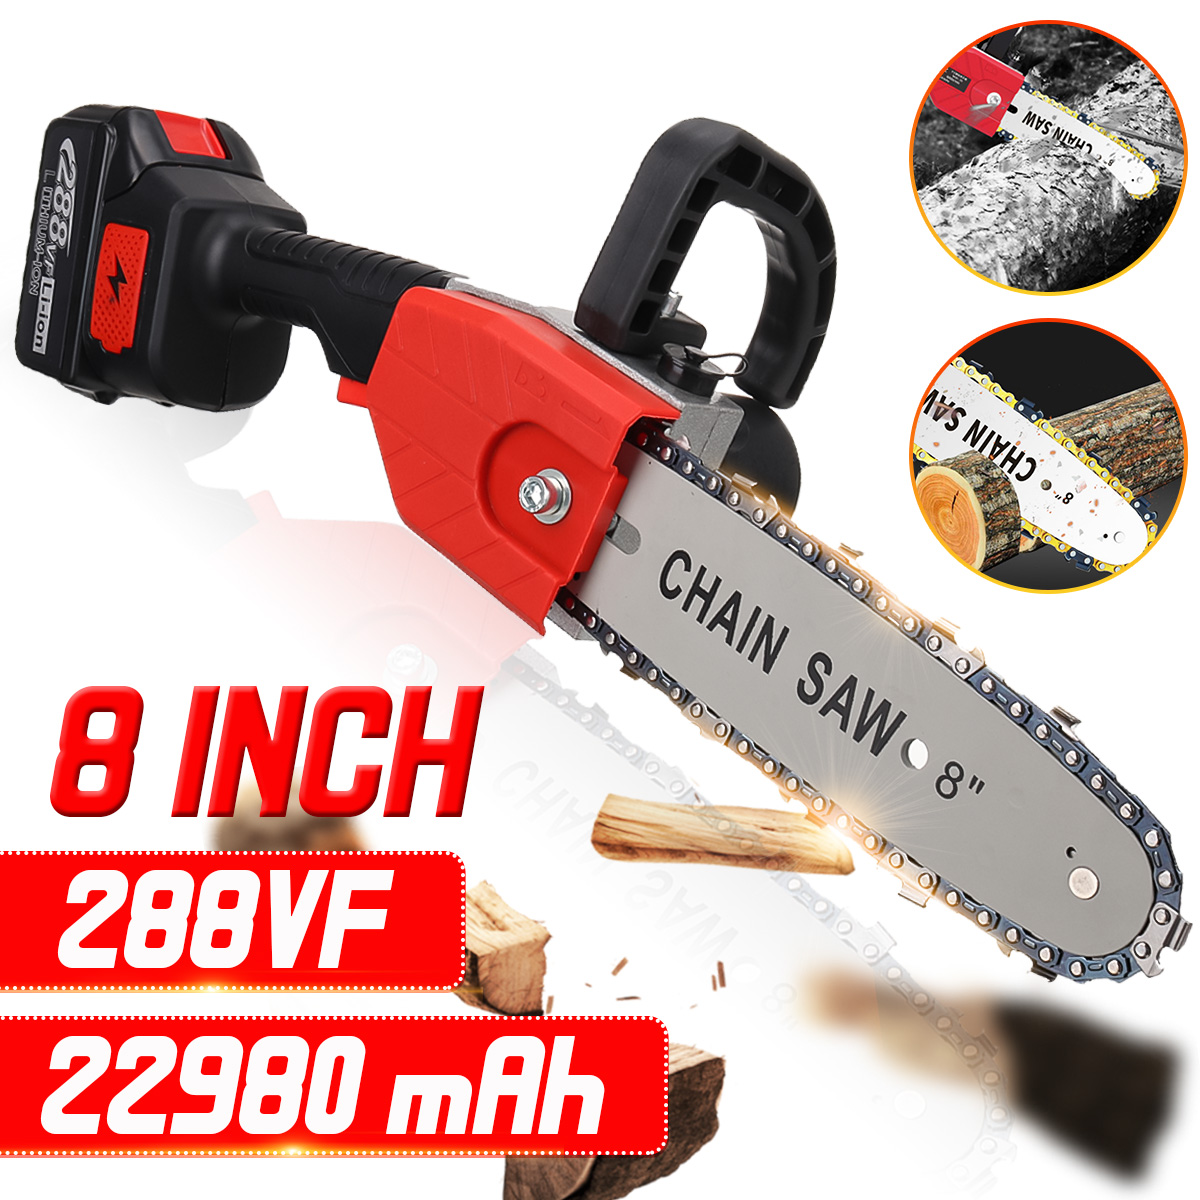 288VF-8Inch-Electric-Chain-Saw-Cordless-One-Hand-Chainsaw-Woodworking-Tool-W-12None-Battery-1845268-3